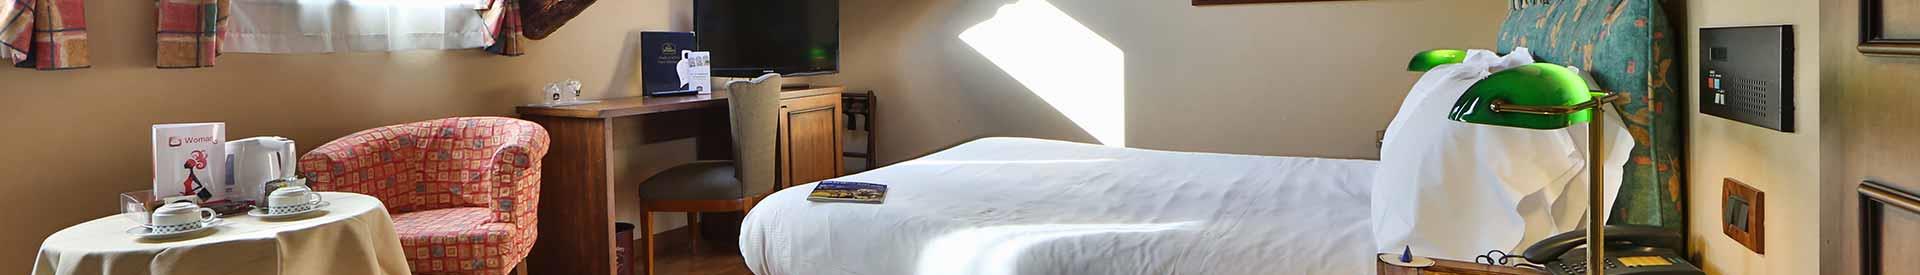  Looking for a hotel for your stay in Torino (TO)? Book/reserve at the Best Western Hotel Piemontese